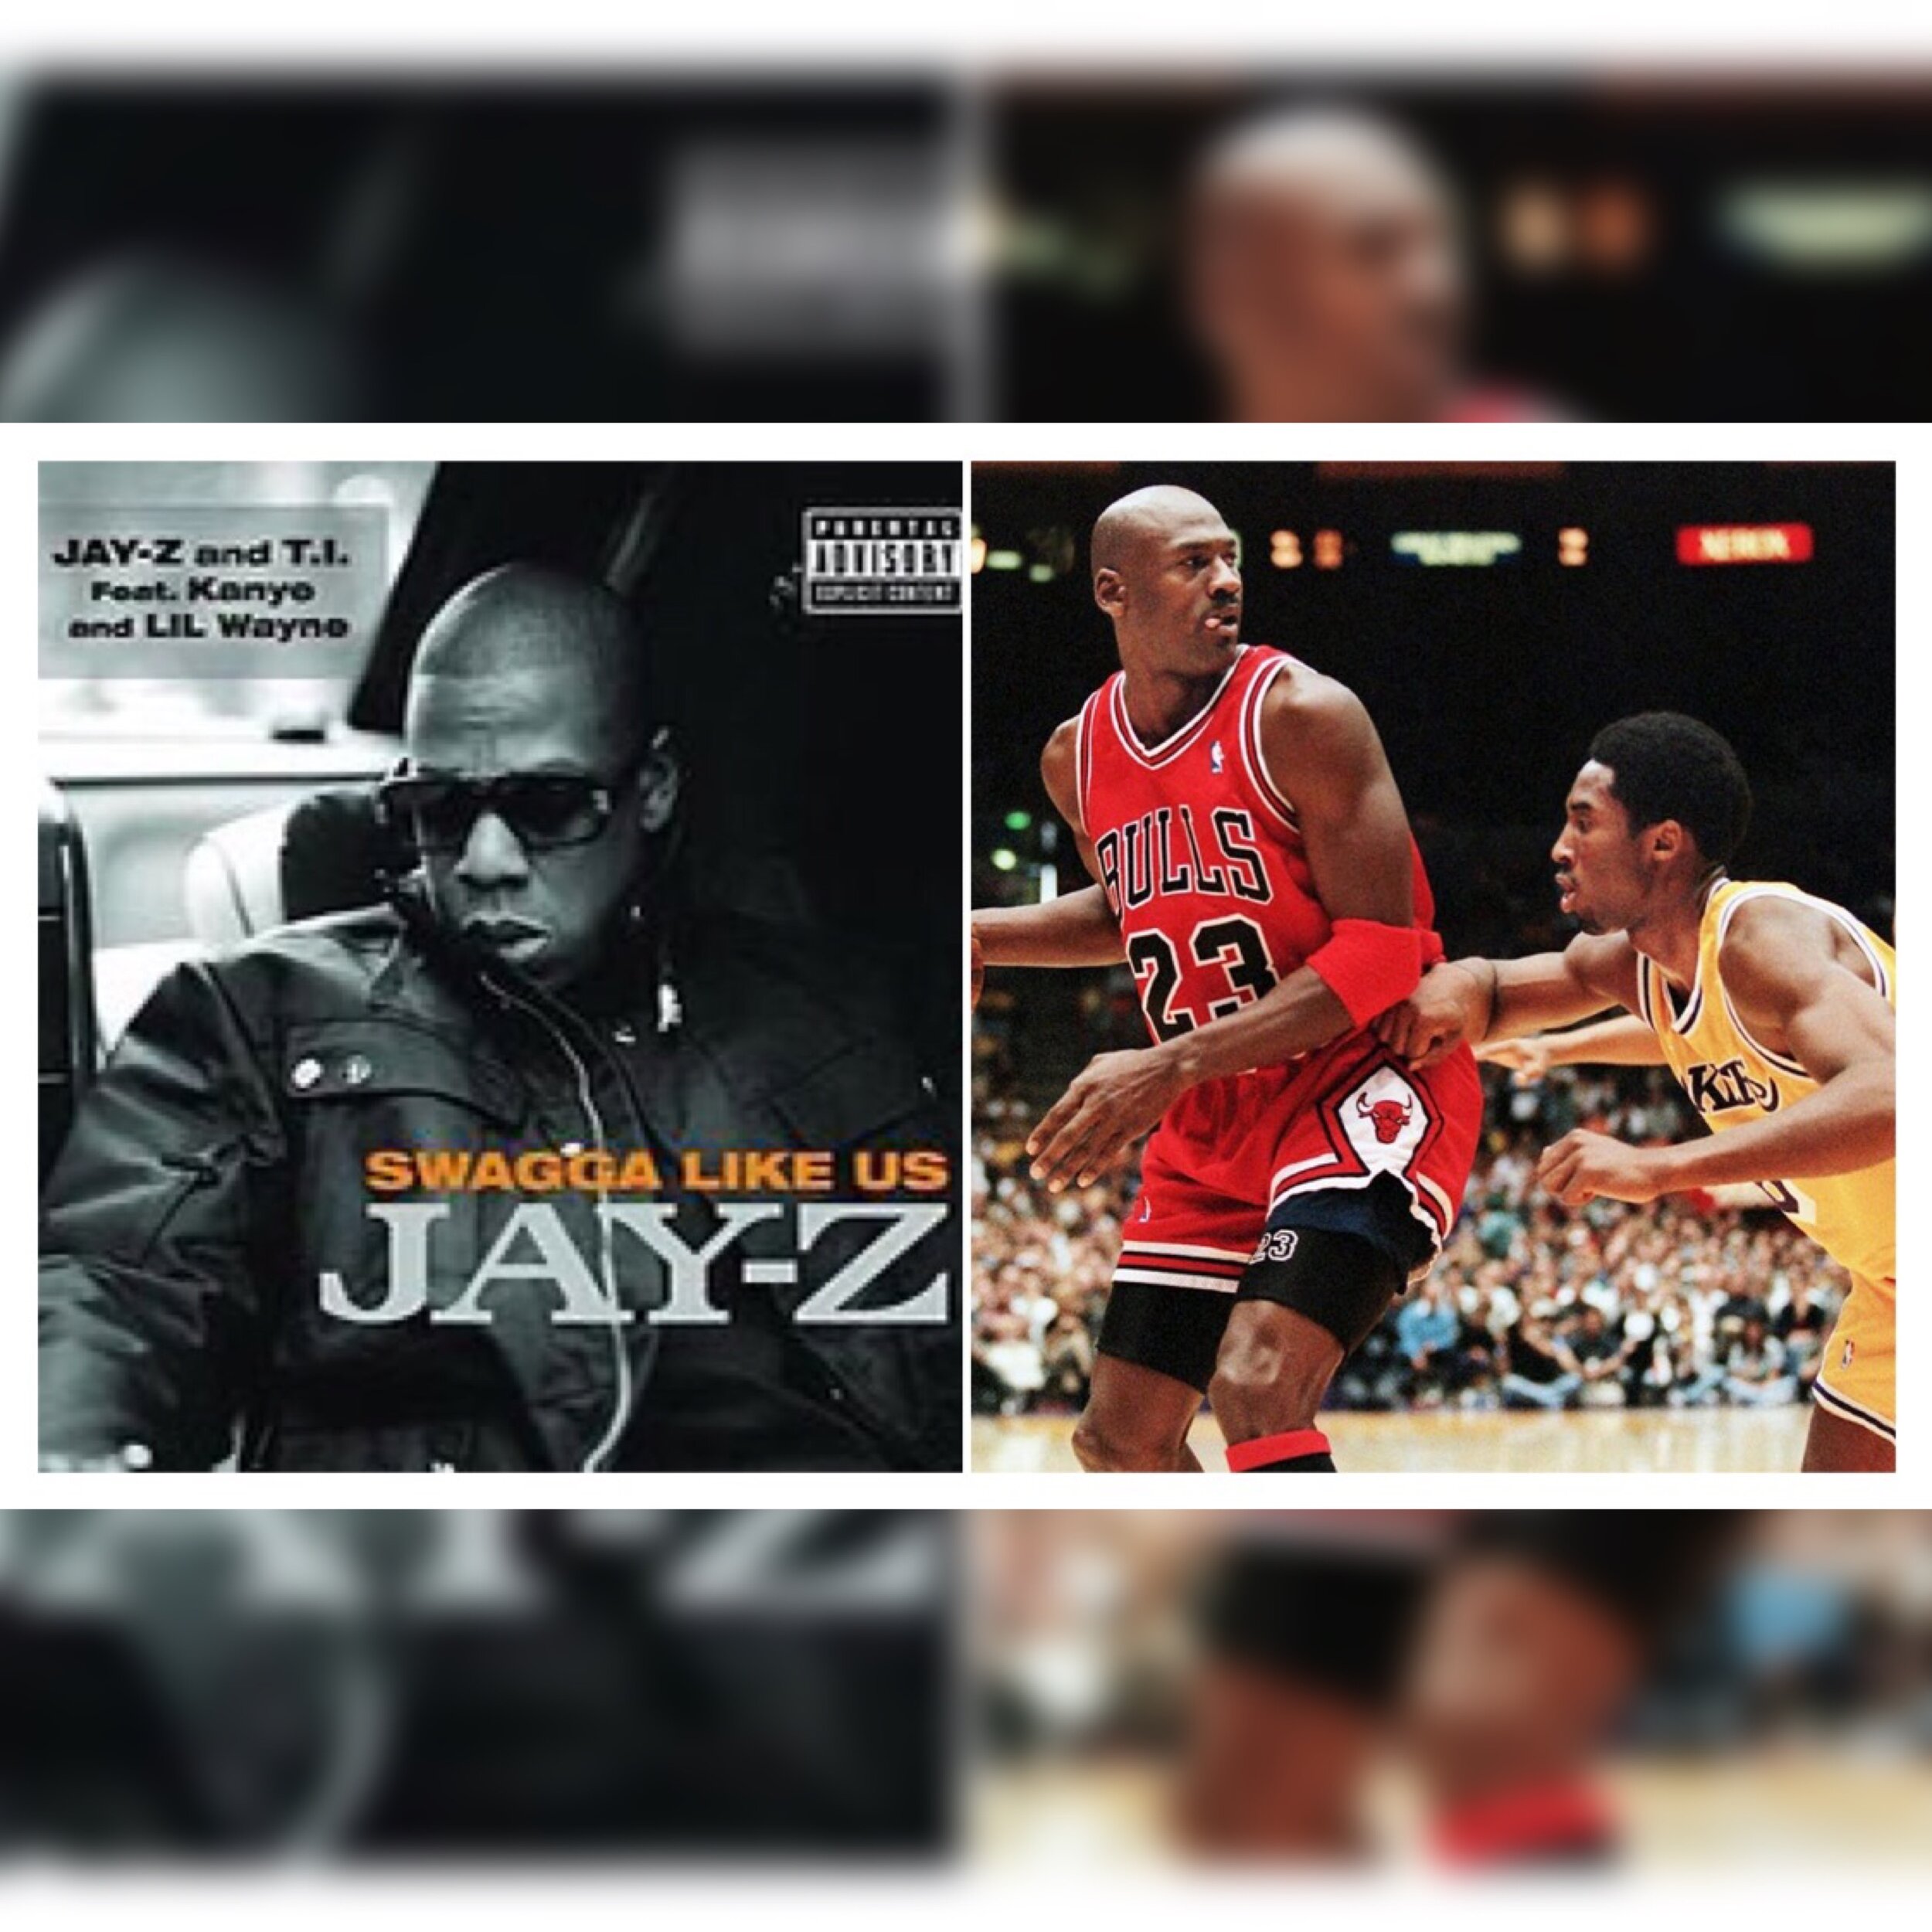 #4 Jay-Z and T.I. feat. Kanye West and Lil Wayne- Swagga Like Us 